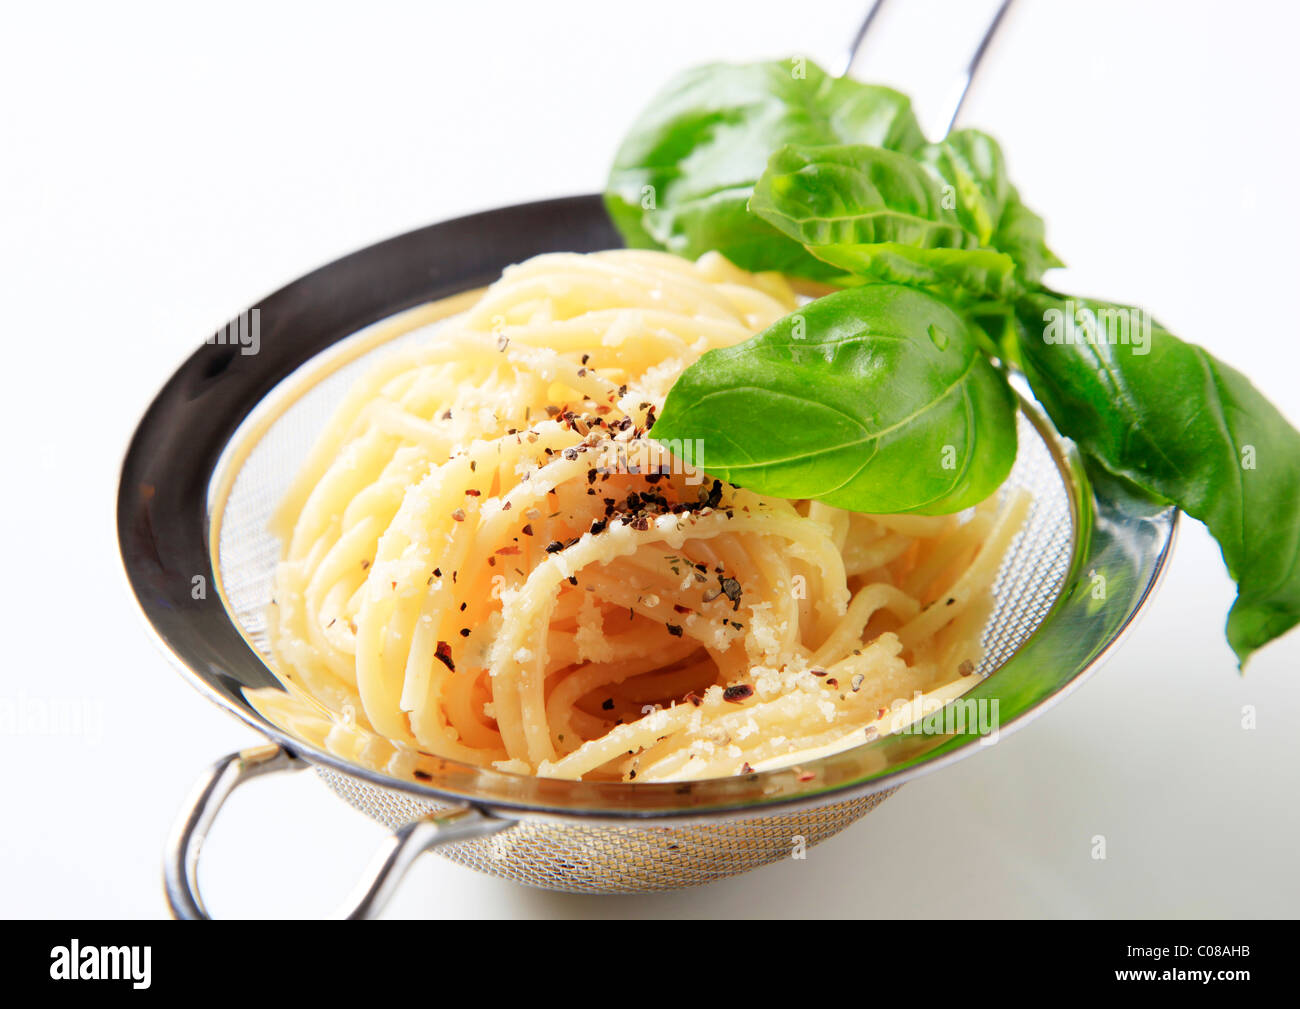 Spaghetti sprinkled with cheese and vegetable mix Stock Photo